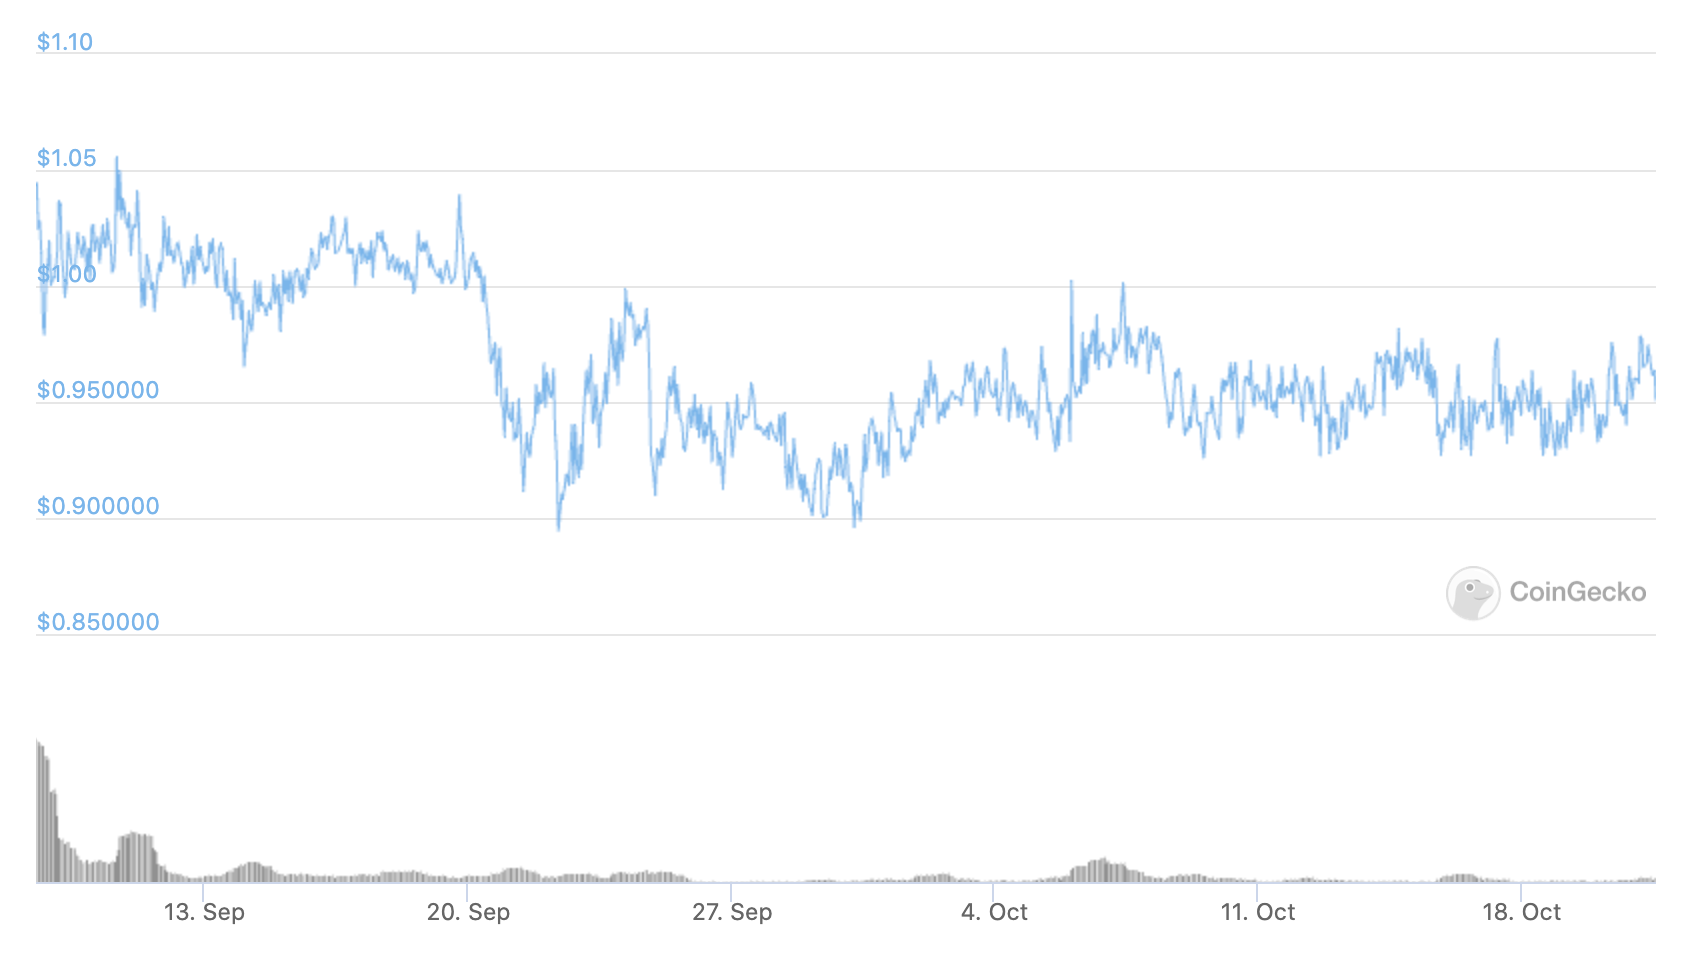 A Hive Backed Dollars (HBD) stablecoin chart from CoinGecko showing price trading around $1 USD.